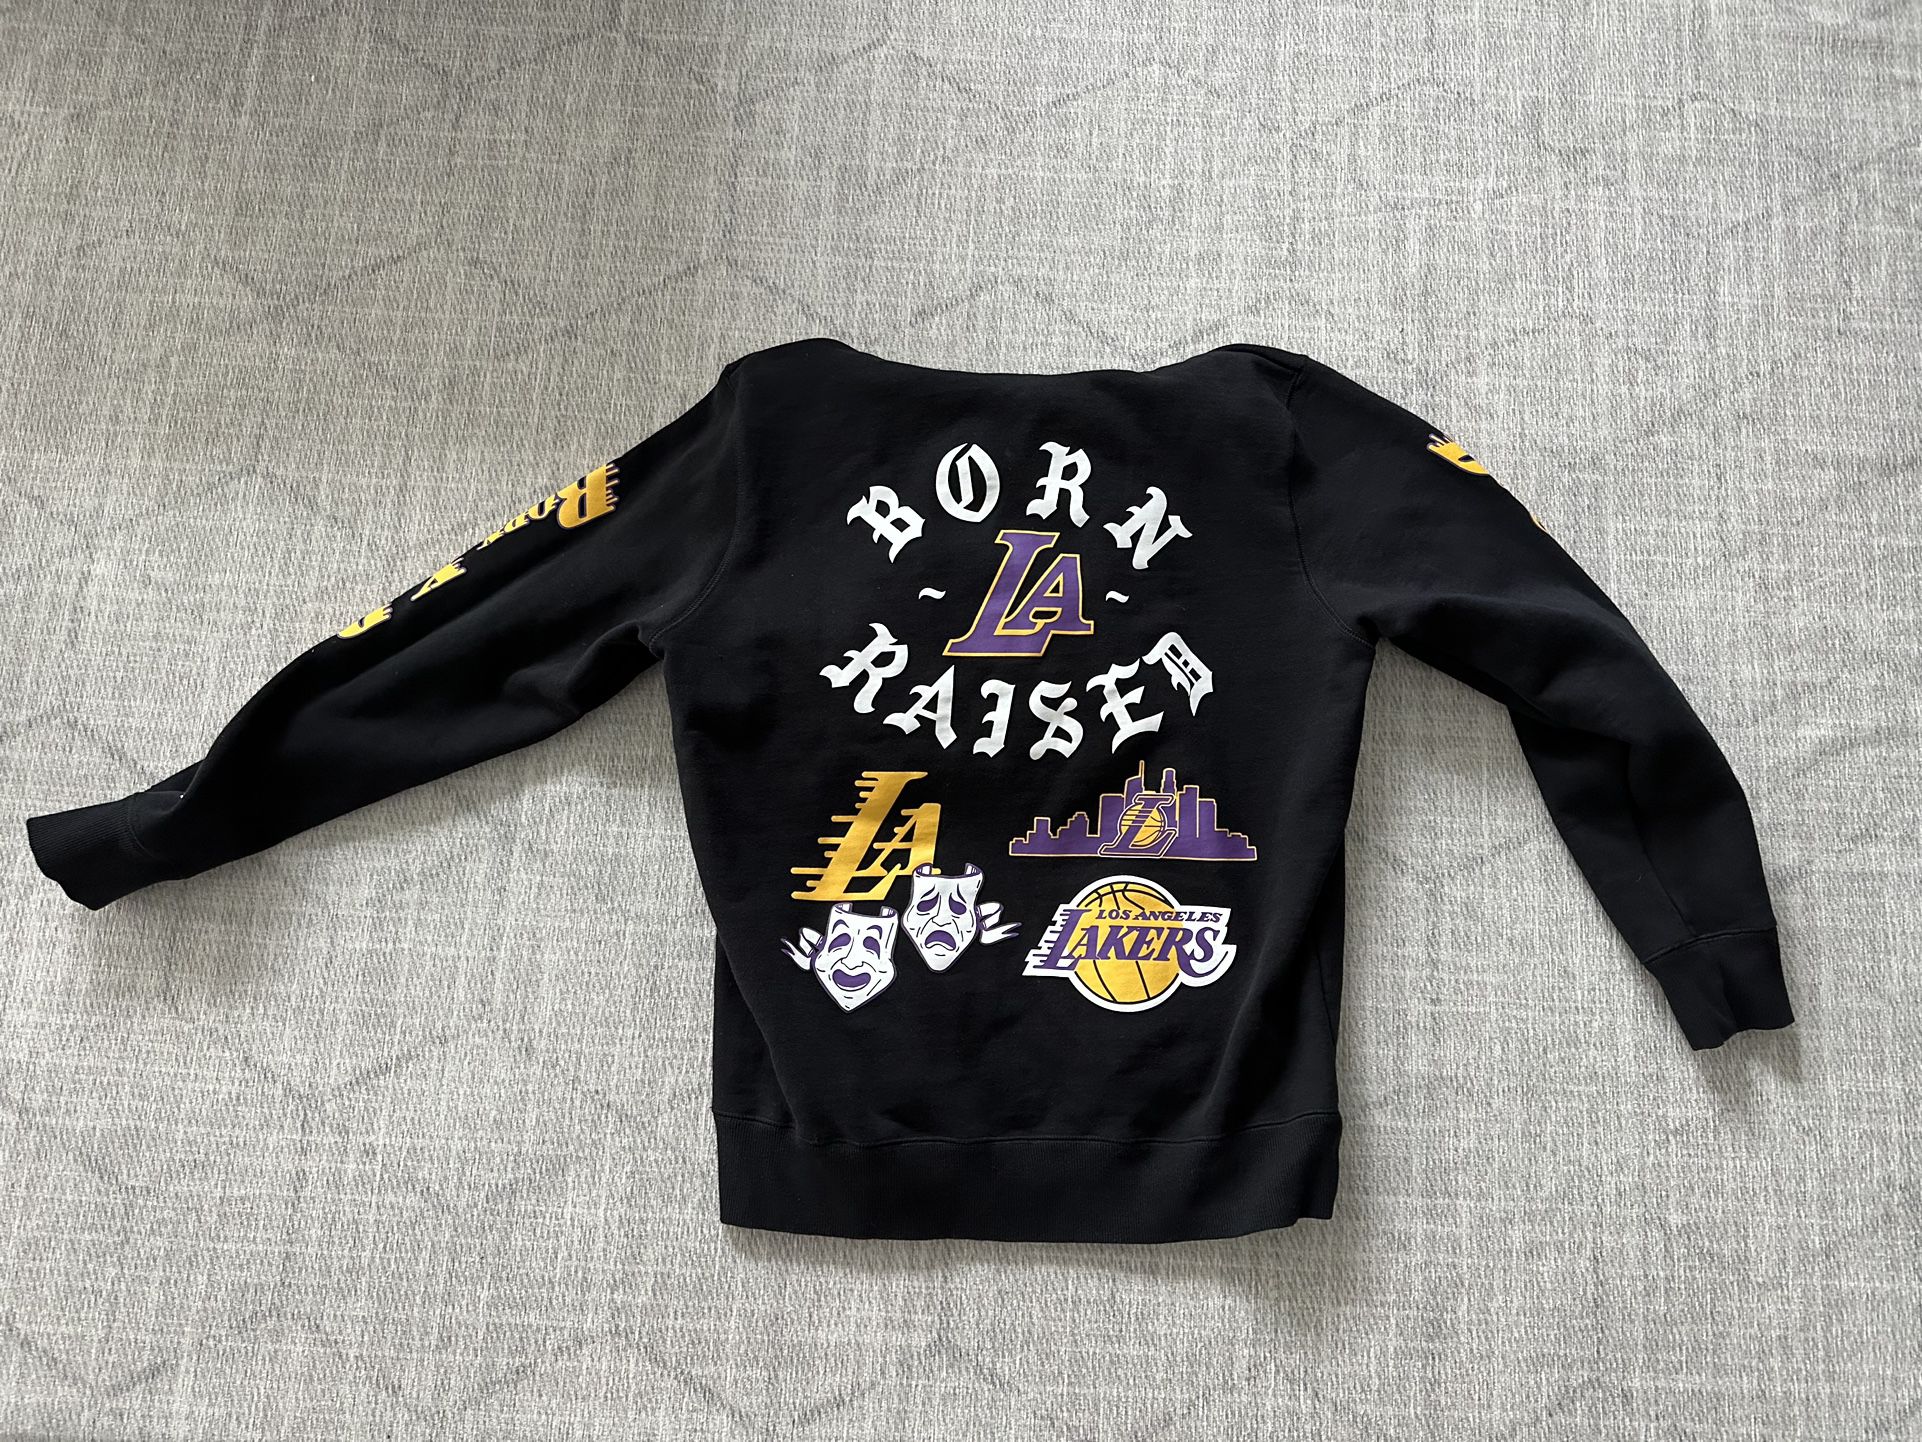 Lakers Born X Raised Hoodie Size Large Never Worn for Sale in Pasadena, CA  - OfferUp